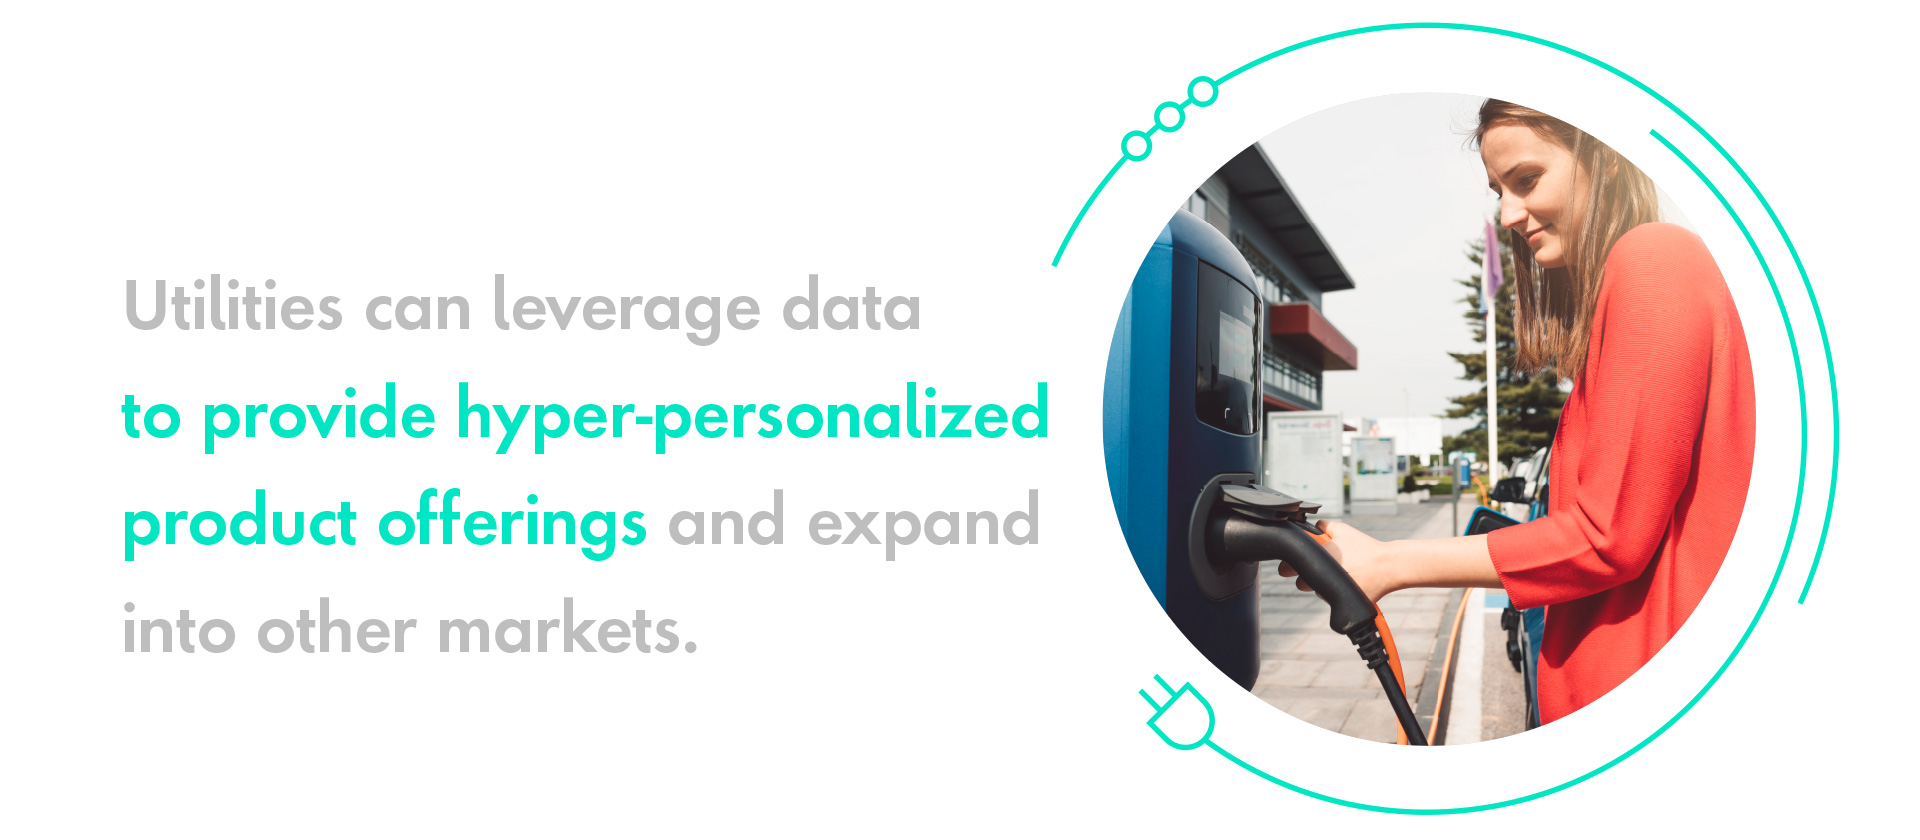 Utilities can leverage datato provide hyper-personalized product offerings and expandinto other markets.